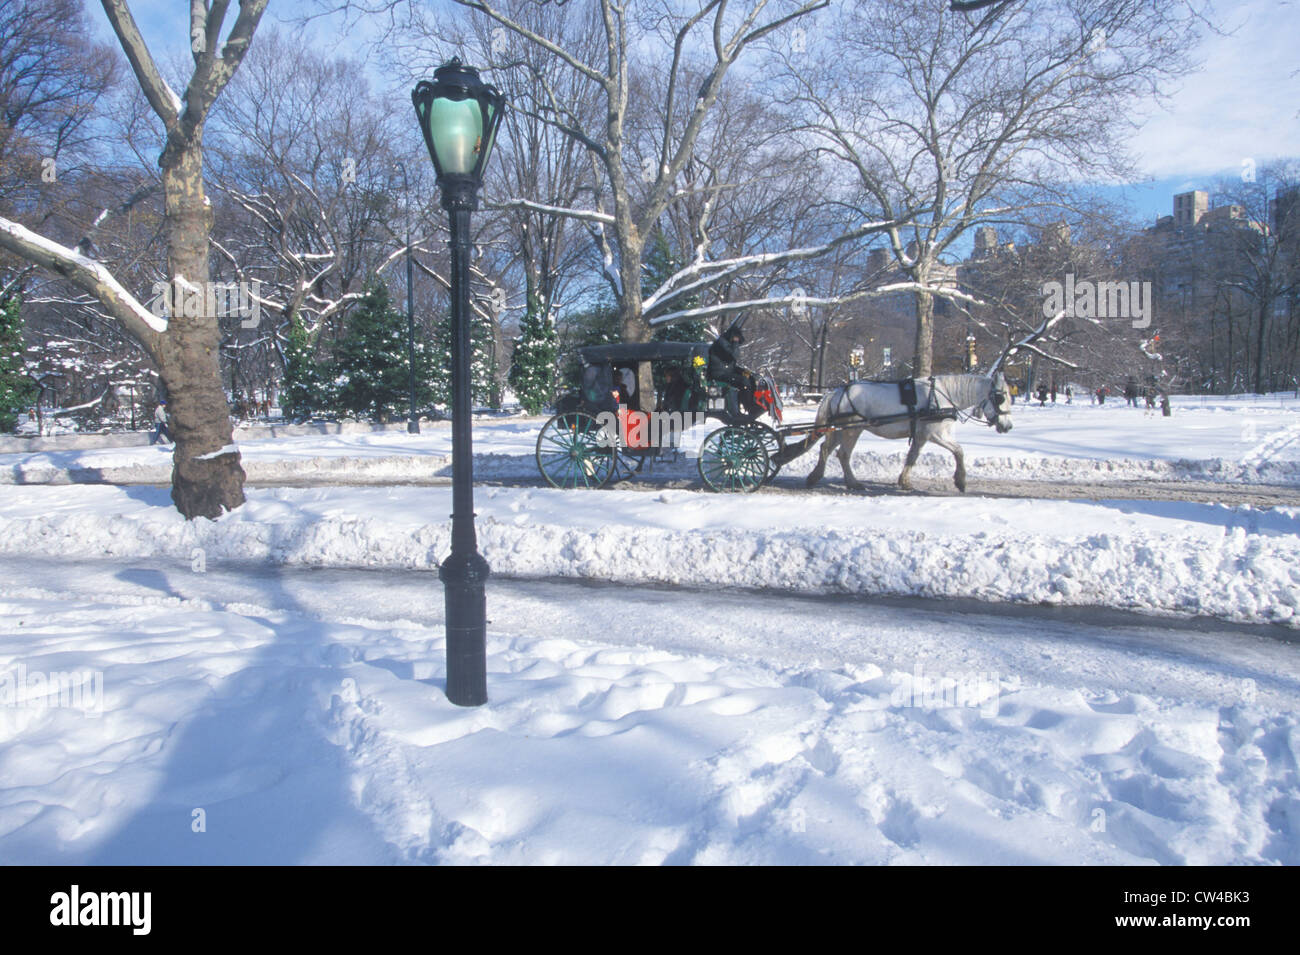 Horse carriage ride in Central Park, Manhattan, New York City, NY after winter snowstorm Stock Photo